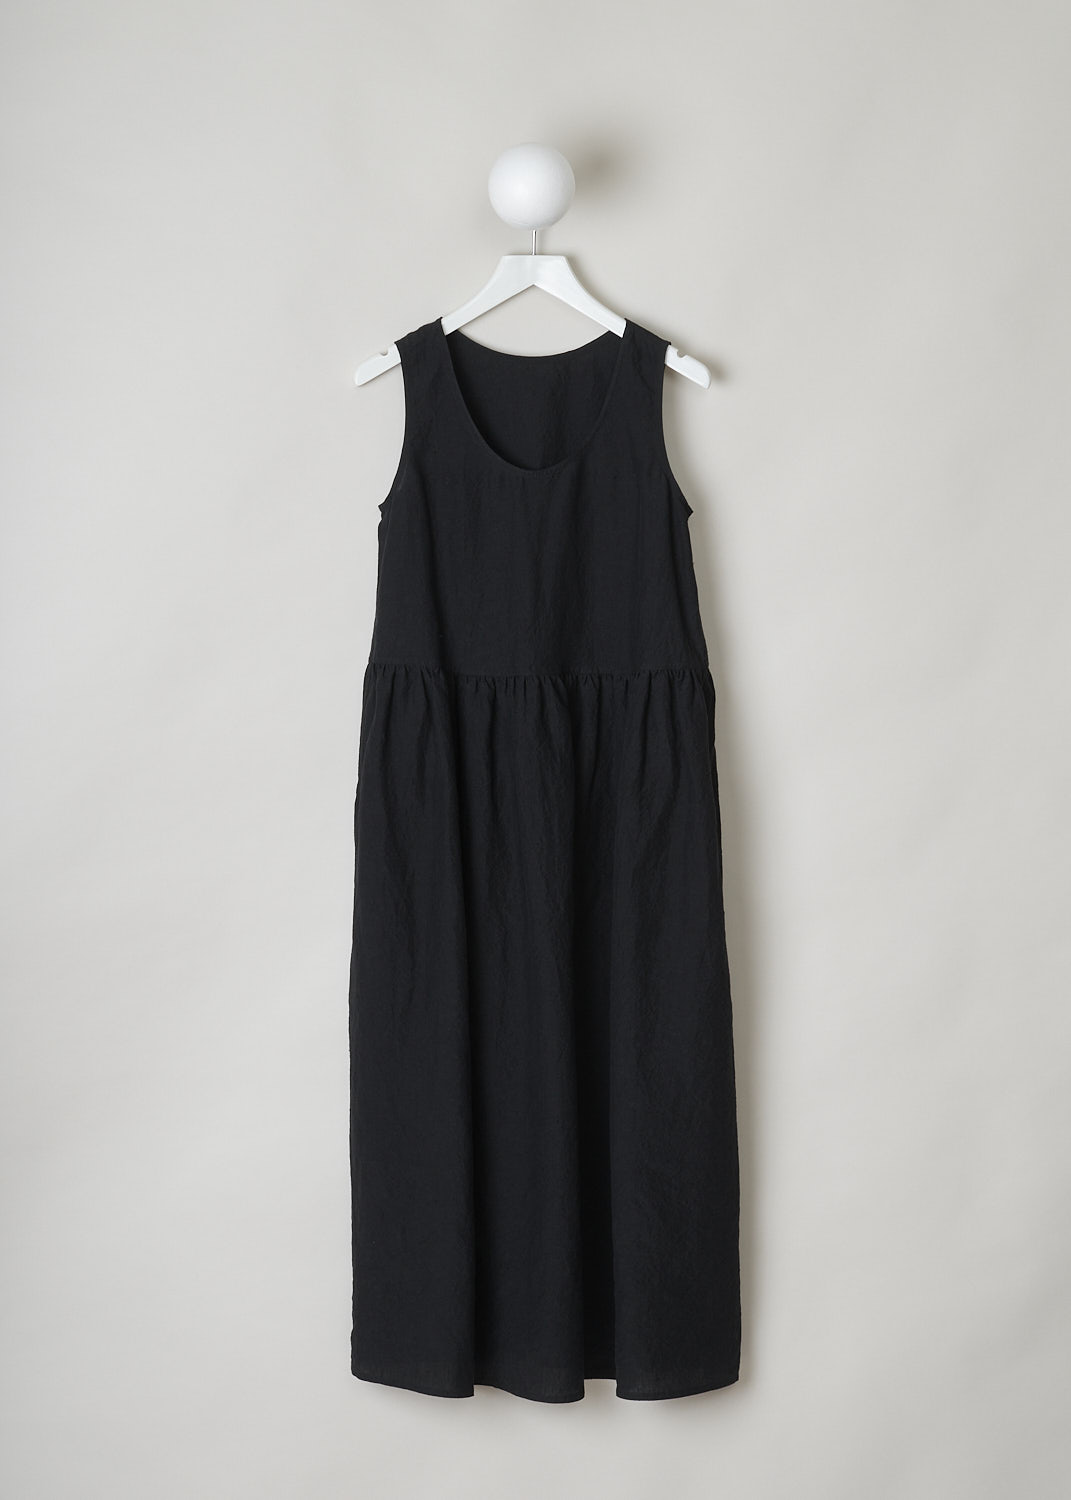 SOFIE Dâ€™HOORE, BLACK LINEN DANDLE DRESS, DANDLE_LIFE_BLACK, Black, Front, This black sleeveless dress has U-neckline. The dress has a wide A-line silhouette. A straight crystal pleated hemline separates the bodice from the midi length skirt. Concealed slanted pockets can be found in the side seam. 
